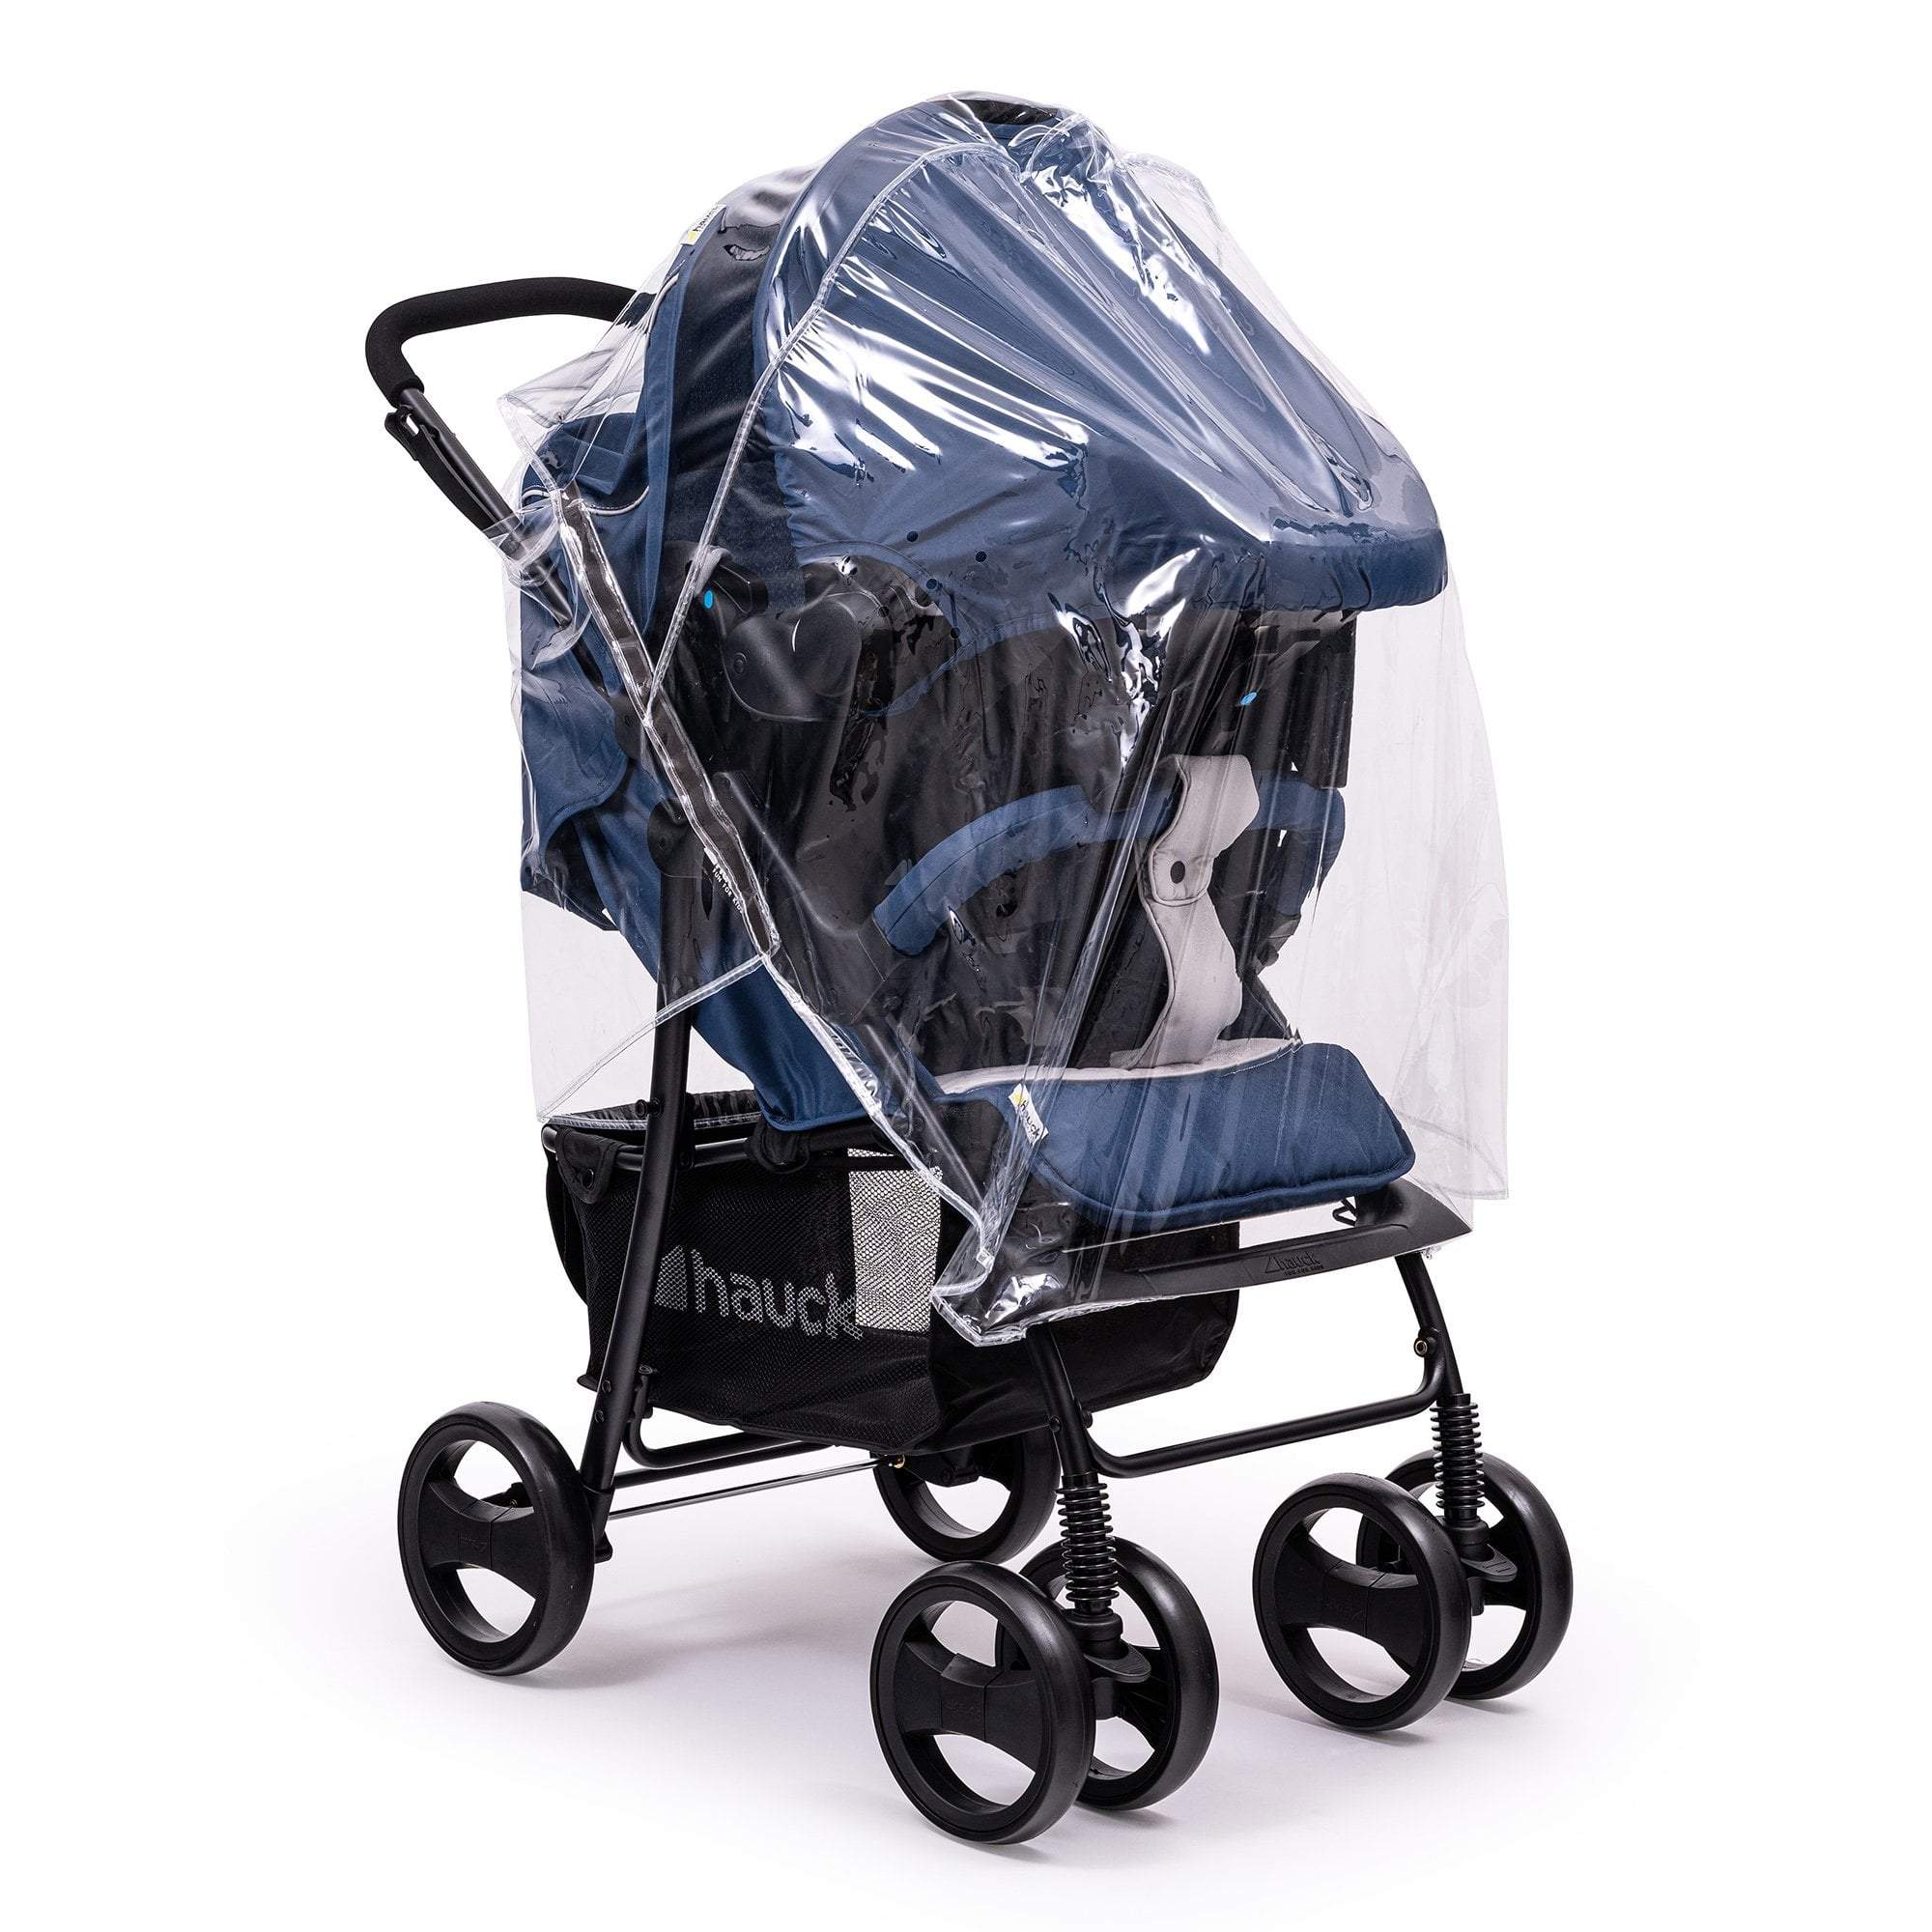 Travel System Raincover Compatible with DoBuggy - Fits All Models - For Your Little One